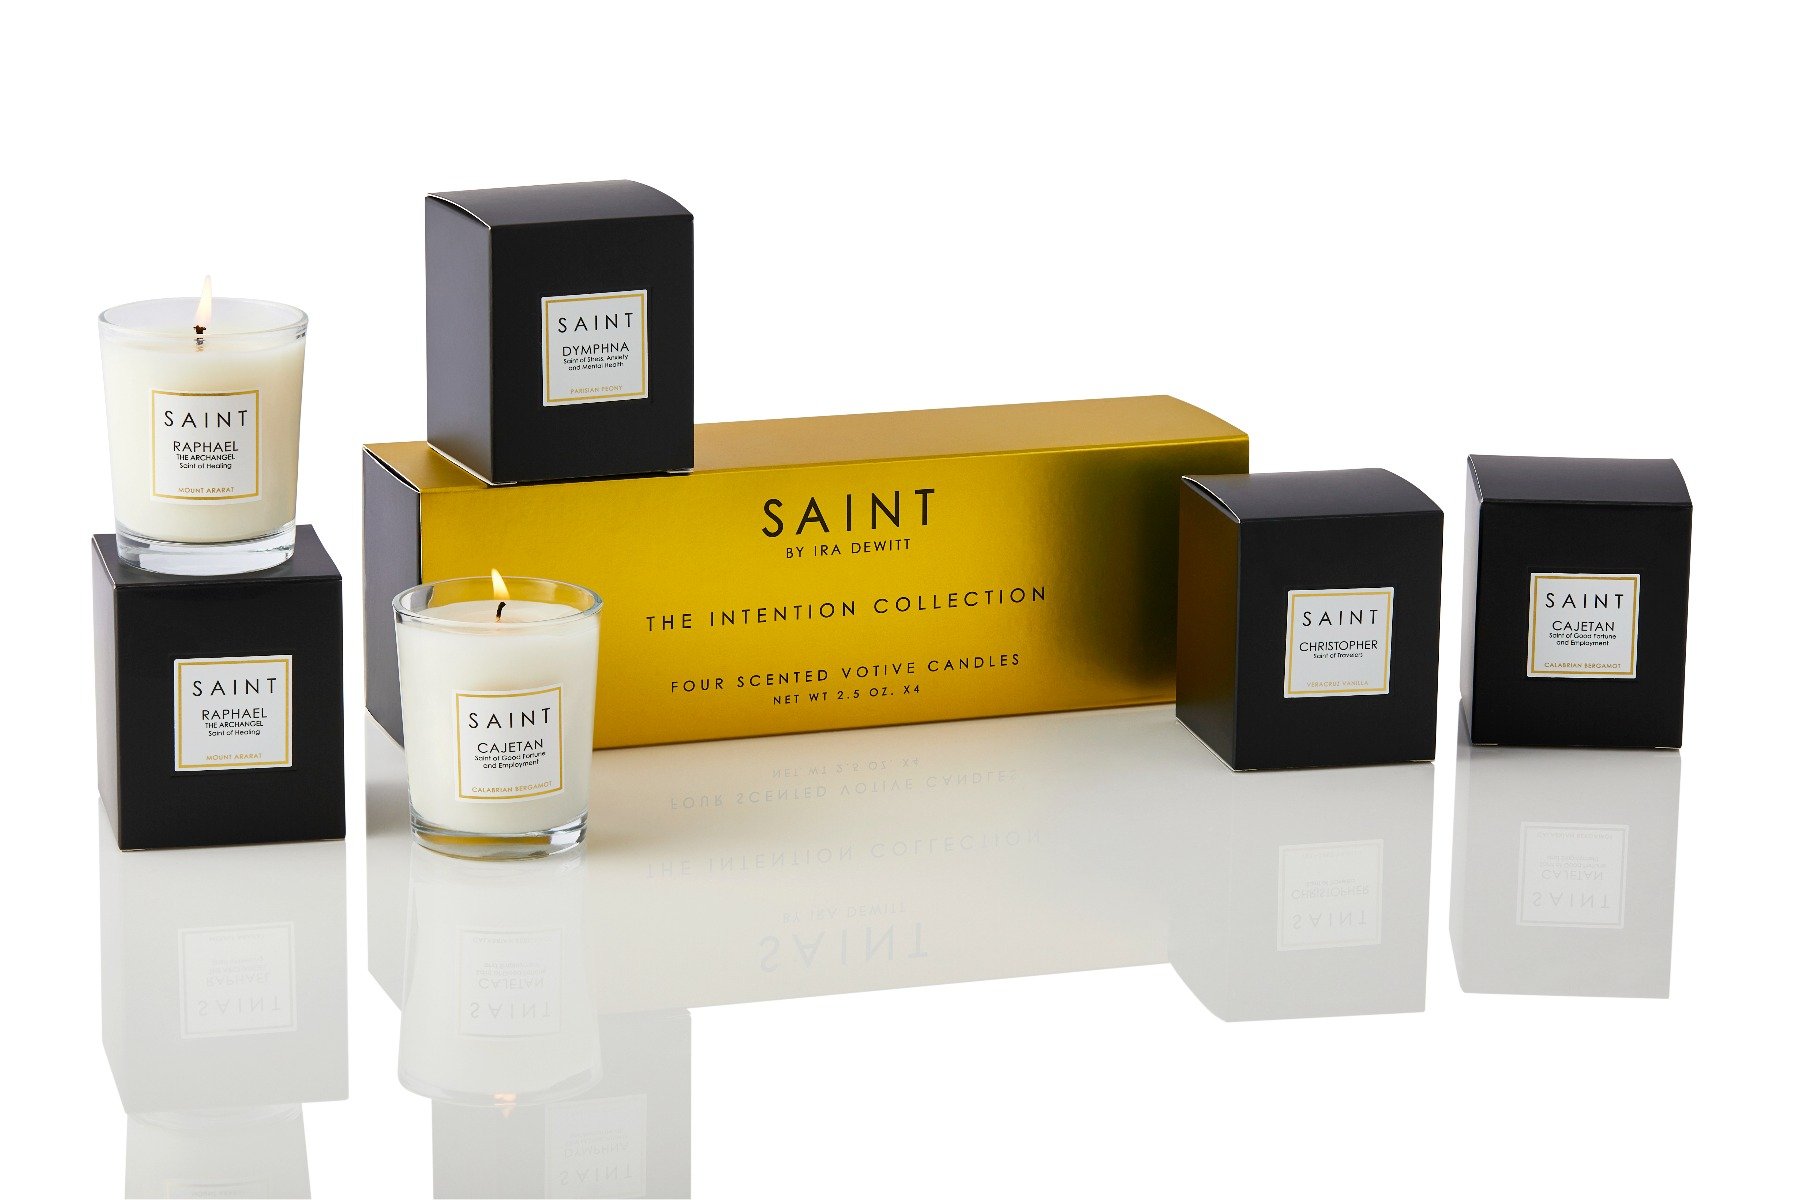   The Intention Collection 4 Votive Candle Set